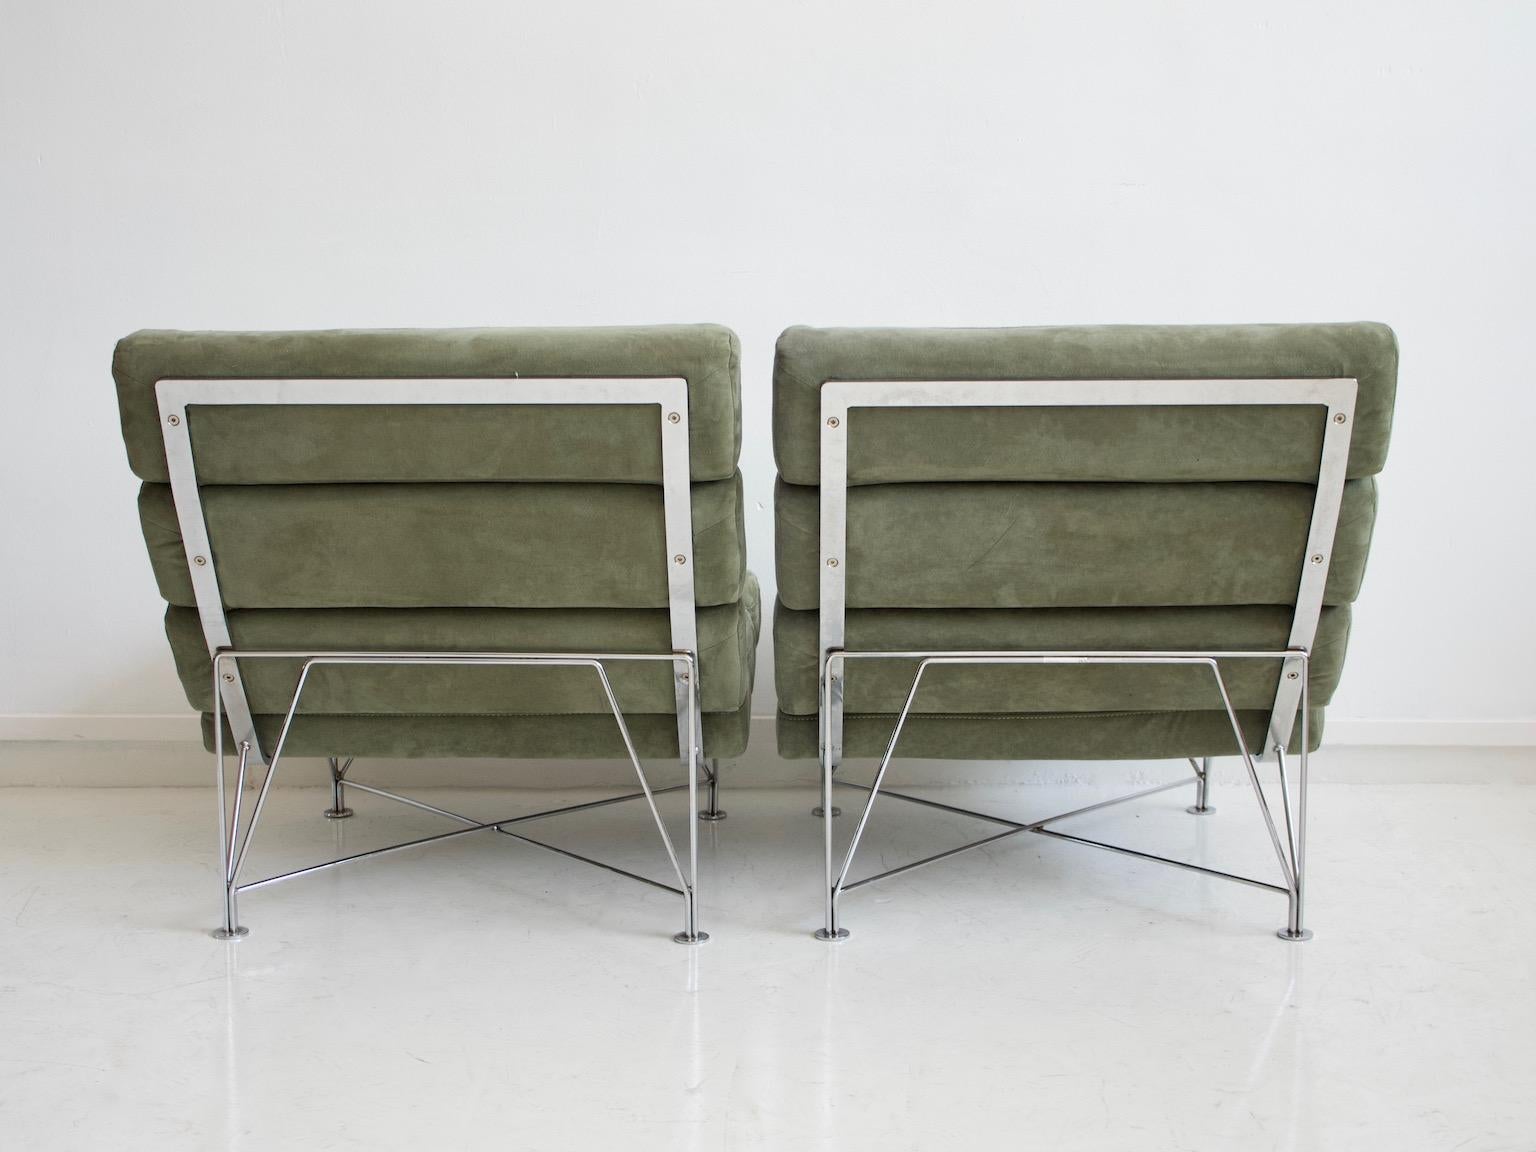 Pair of Green Lounge Chairs with Steel Frame by DUX Design Team For Sale 2